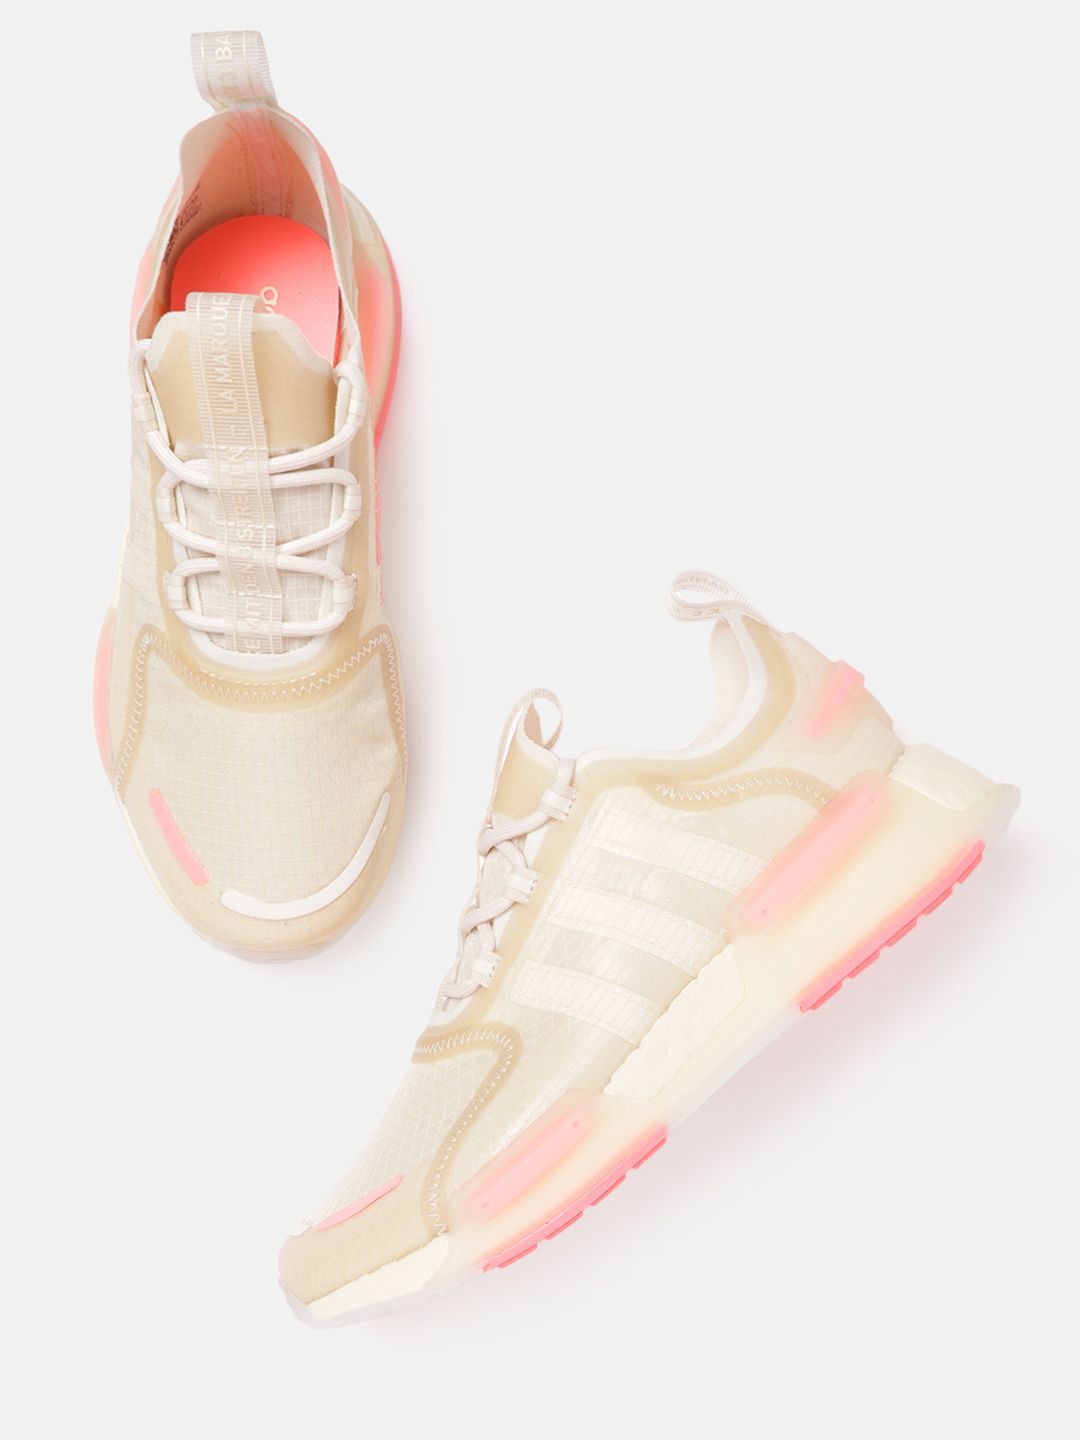 ADIDAS Originals Women Cream-Coloured & Pink Boost Nmd R1 V3 Sustainable Training Shoes Price in India